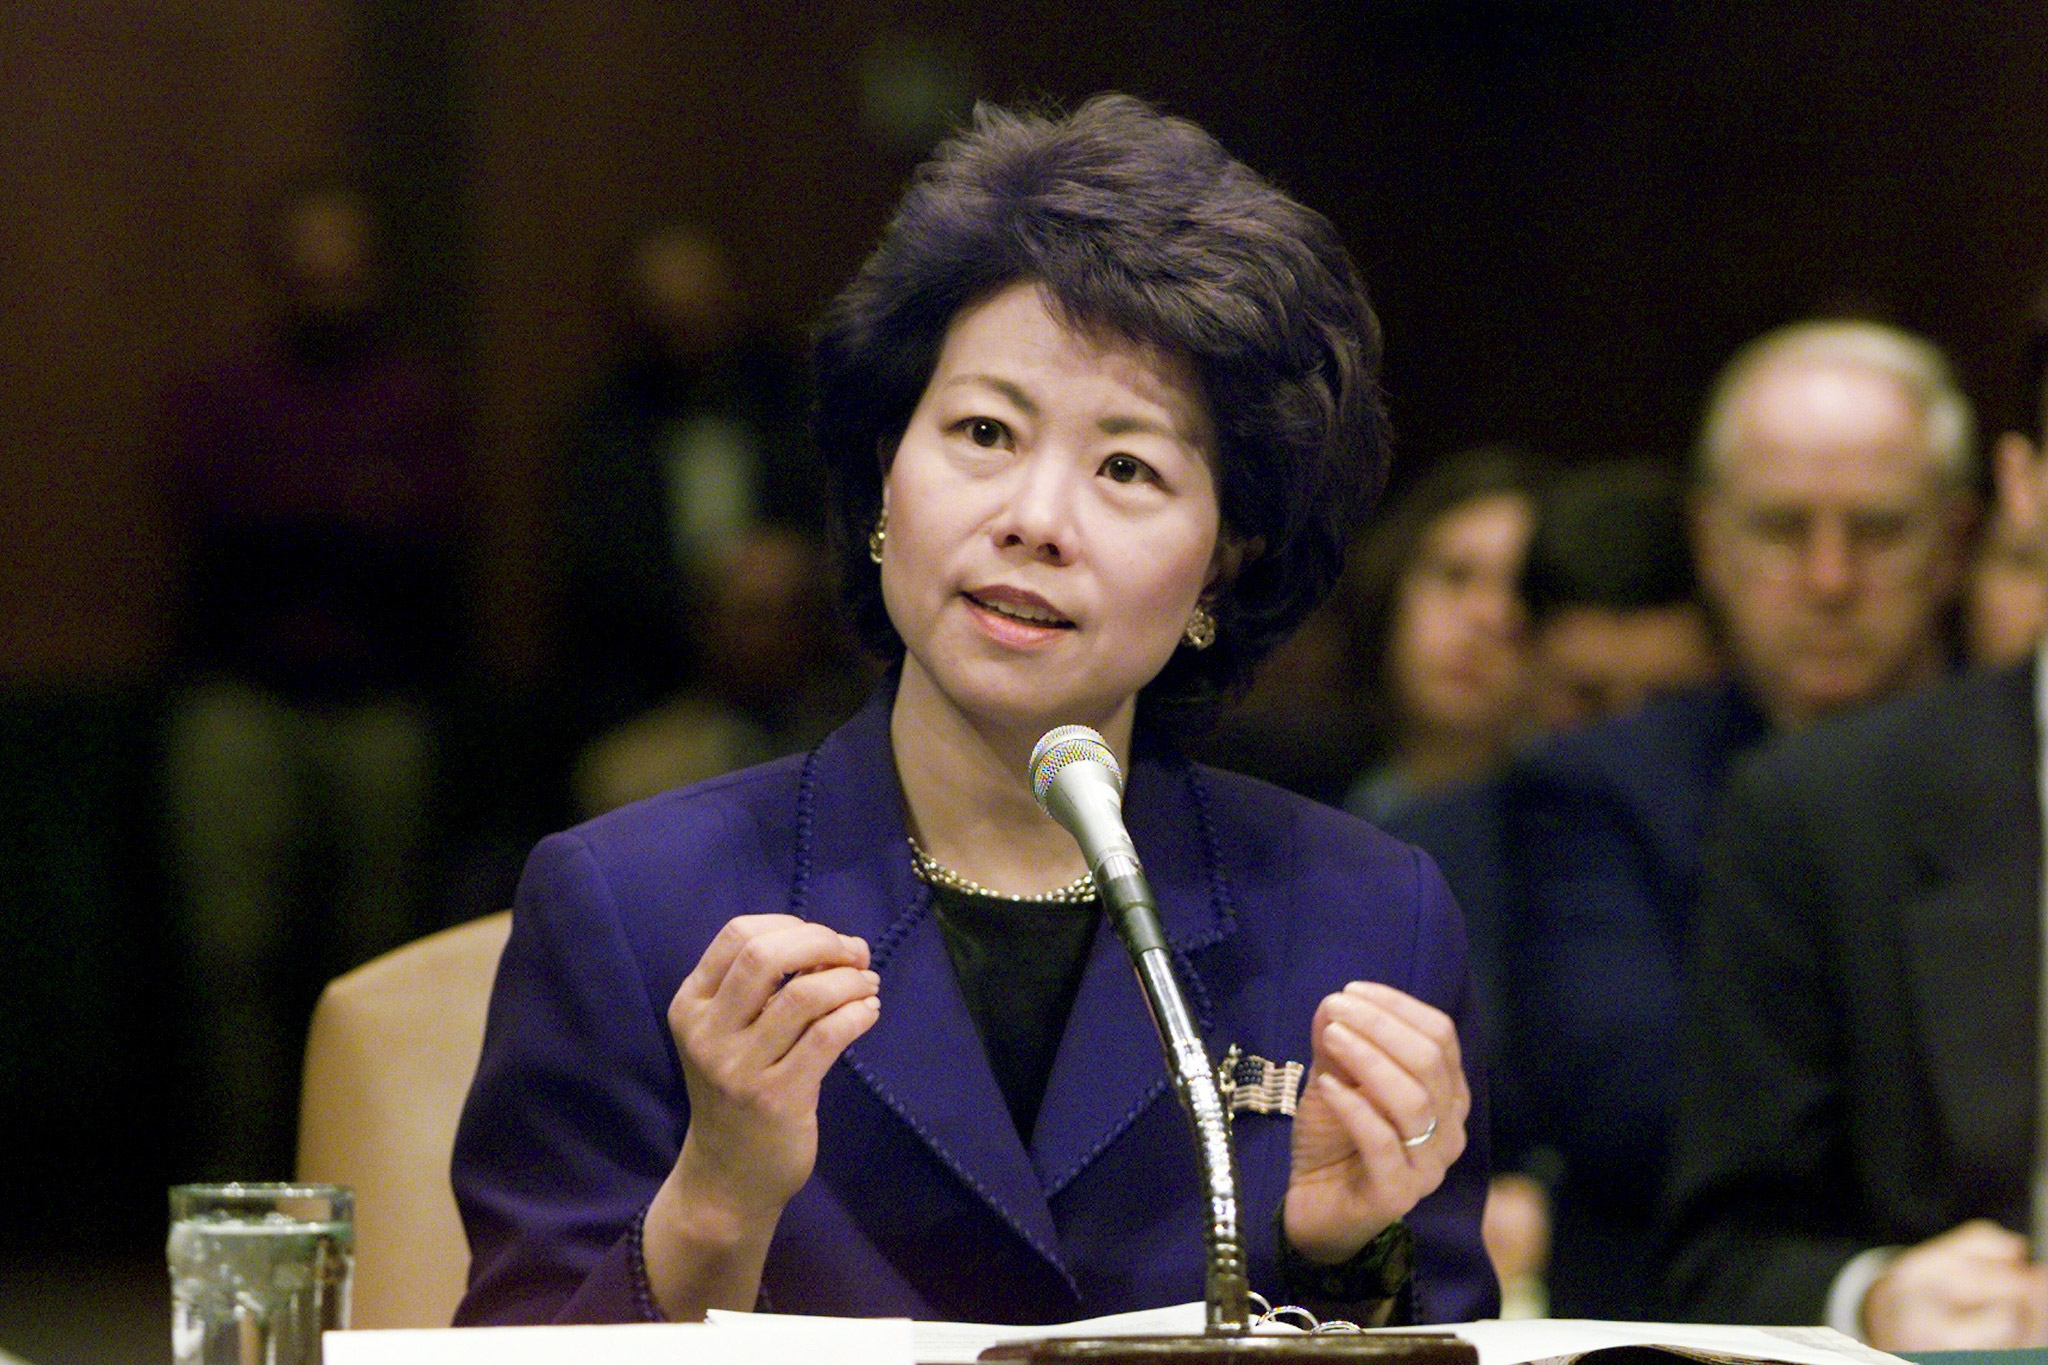 Elaine Chao testifies at hearing of the Senate Health, Education, Labor and Pensions Committee on her confirmation as labor secretary, circa 2000.